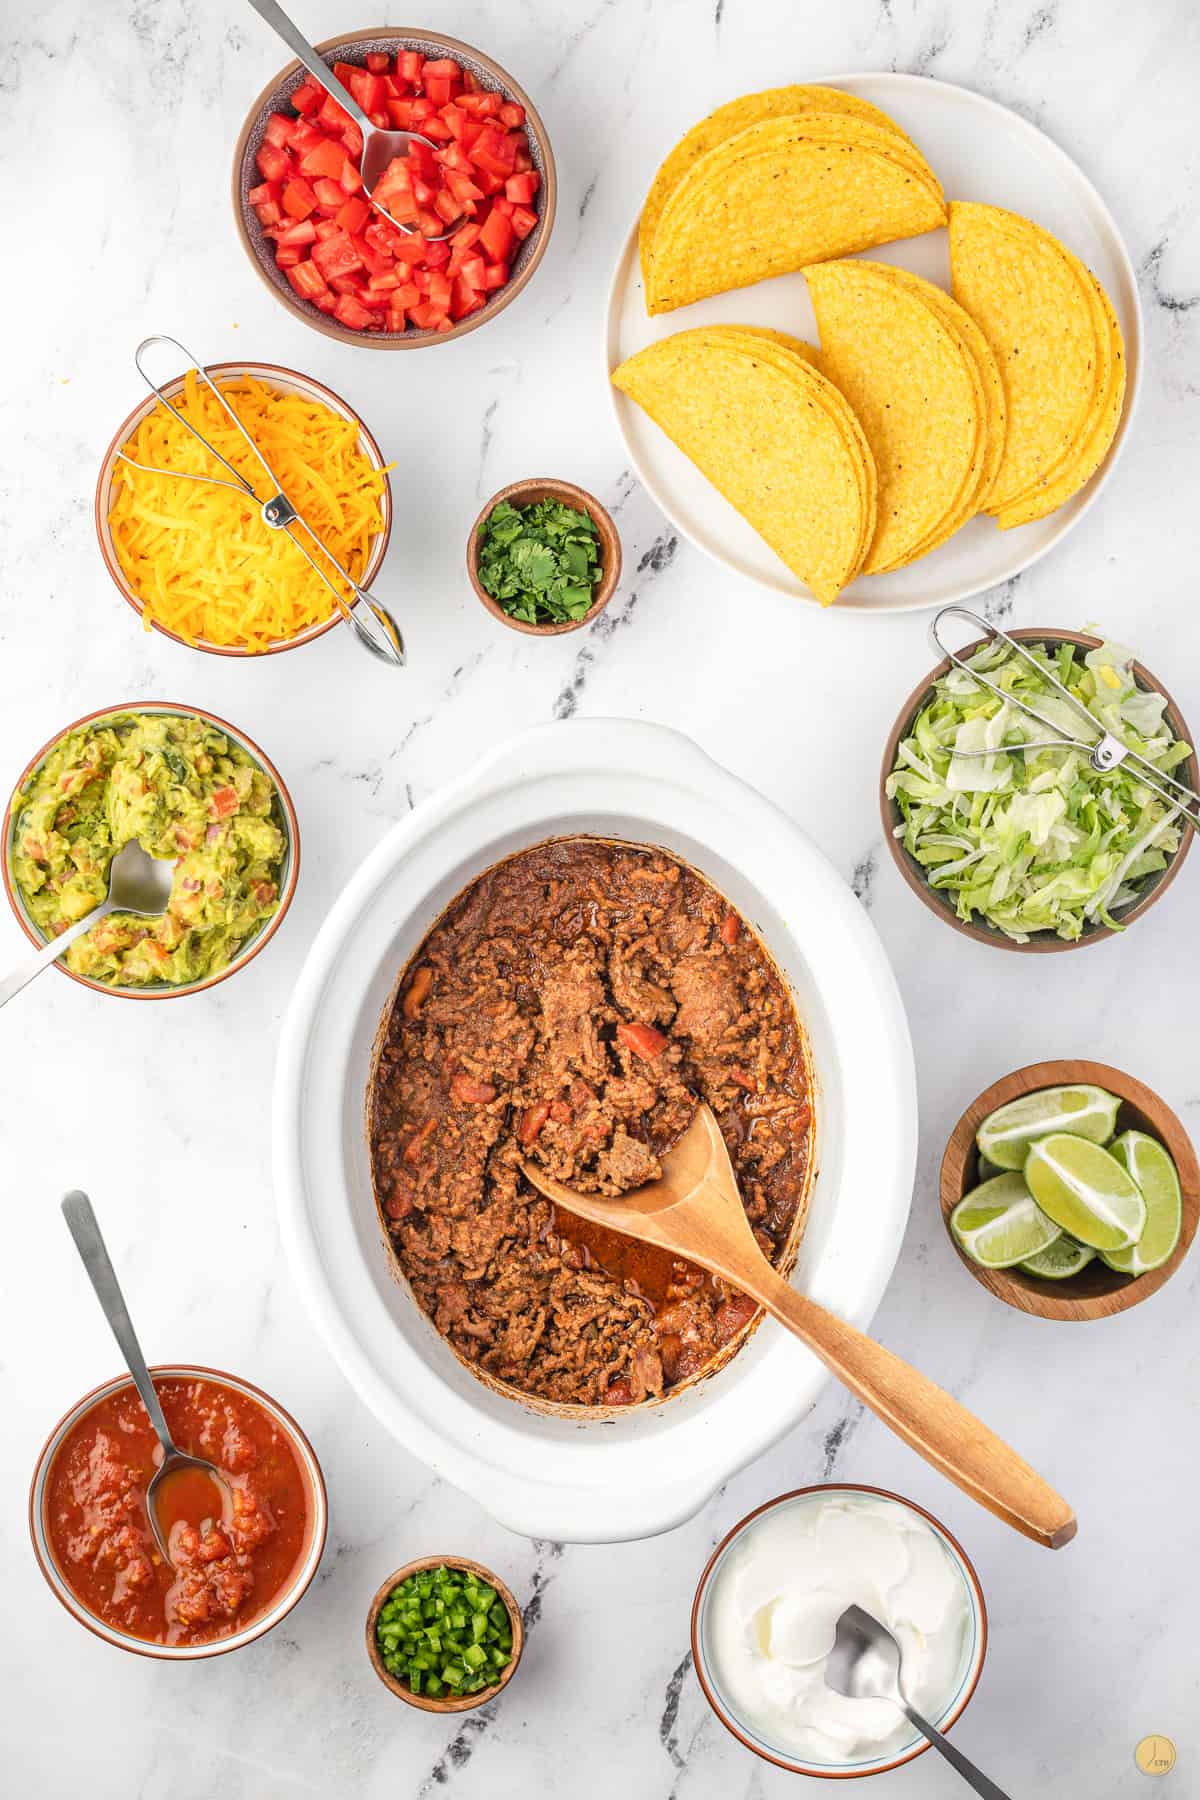 ingredients for slow cooker taco bar in bowls